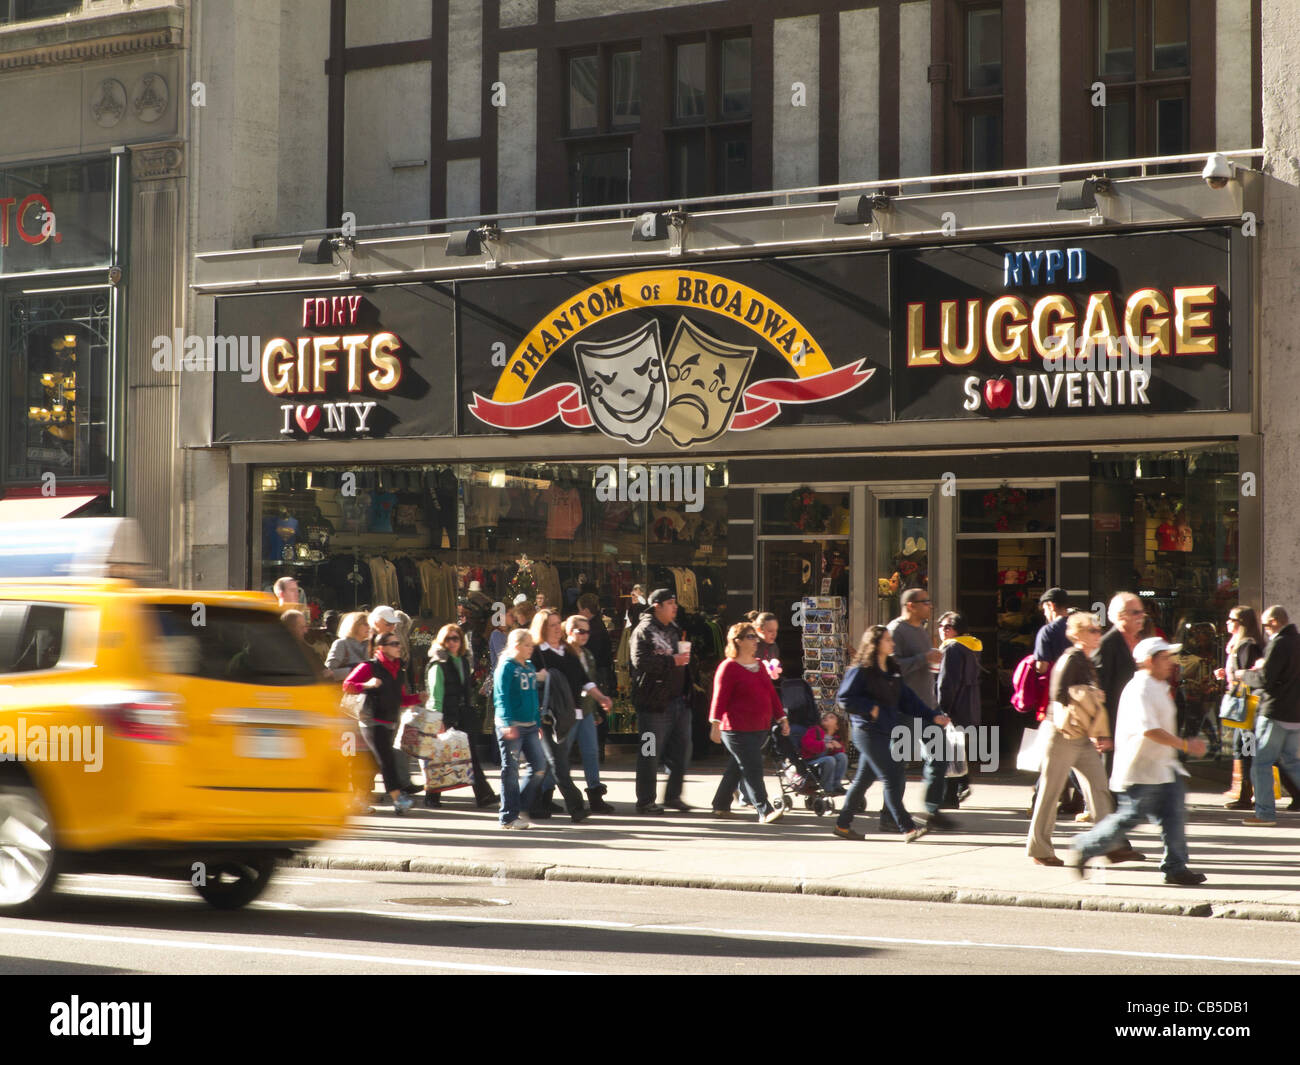 "Phantom of Broadway" Luggage and Gift Store, Fifth Avenue, NYC Stock